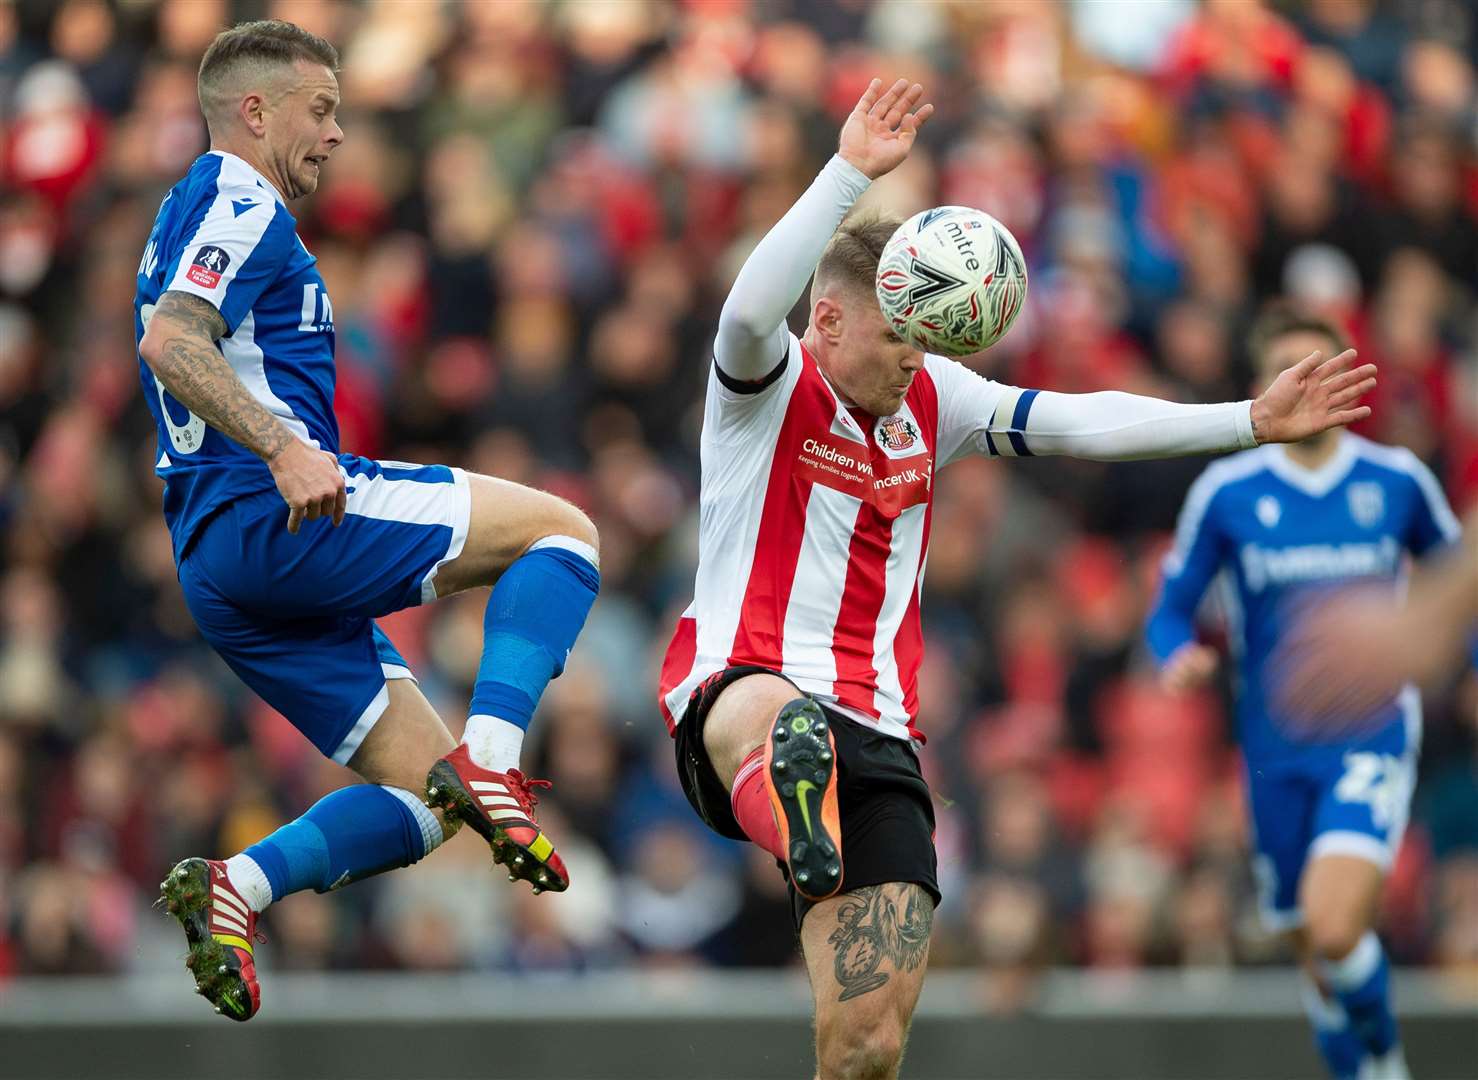 Mark Byrne challenges with Max Power in last weekend's FA Cup match at Sunderland